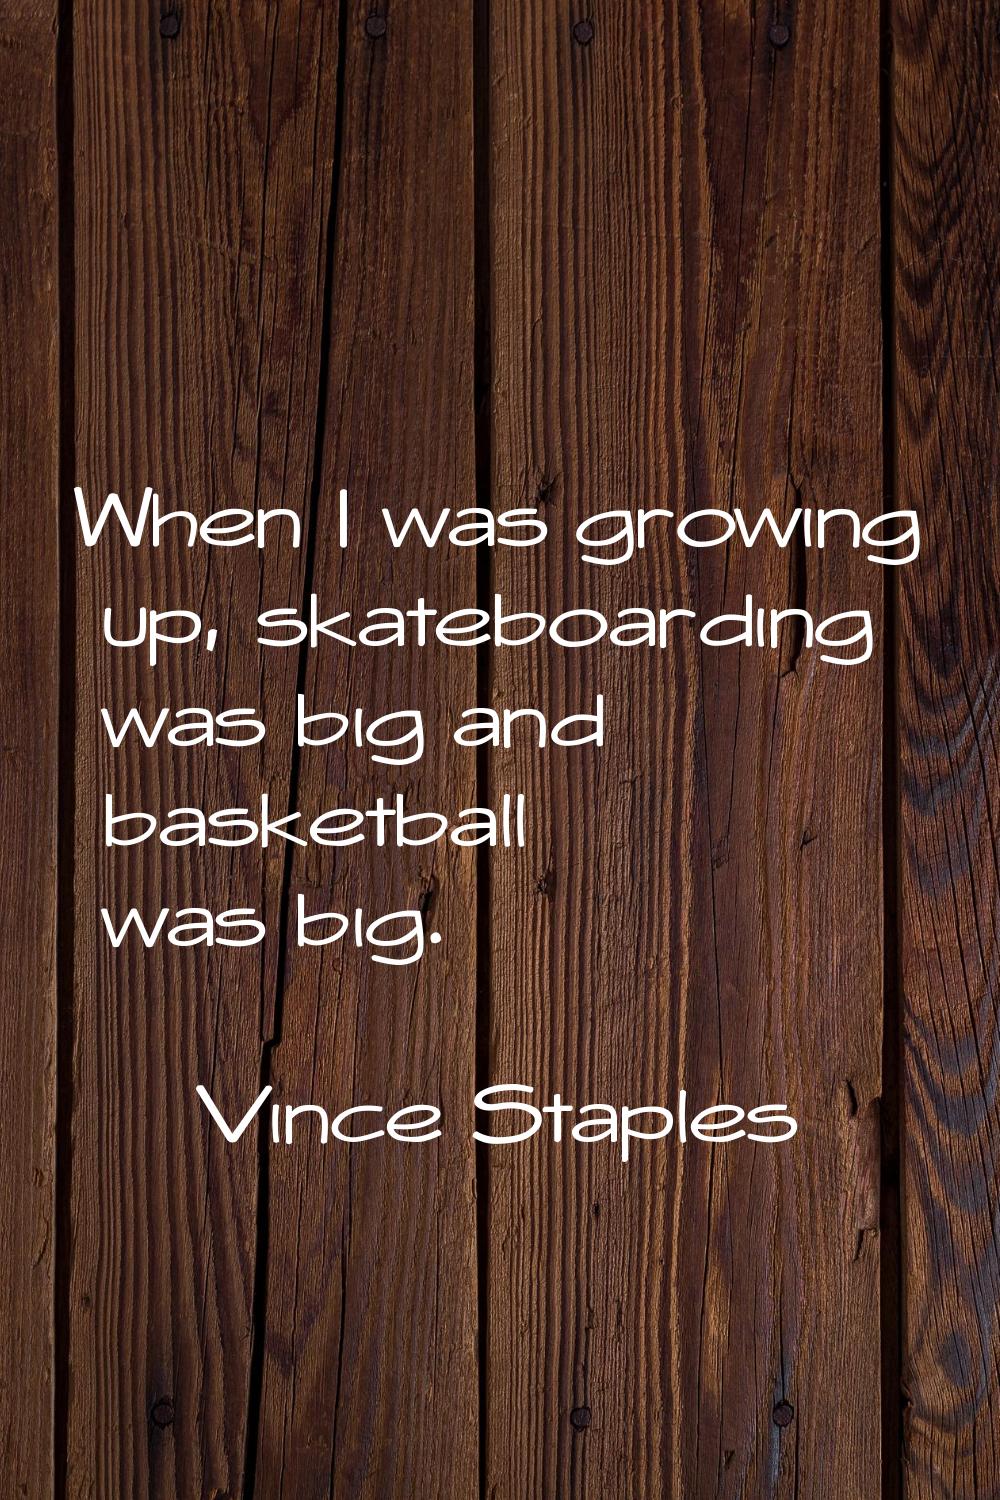 When I was growing up, skateboarding was big and basketball was big.